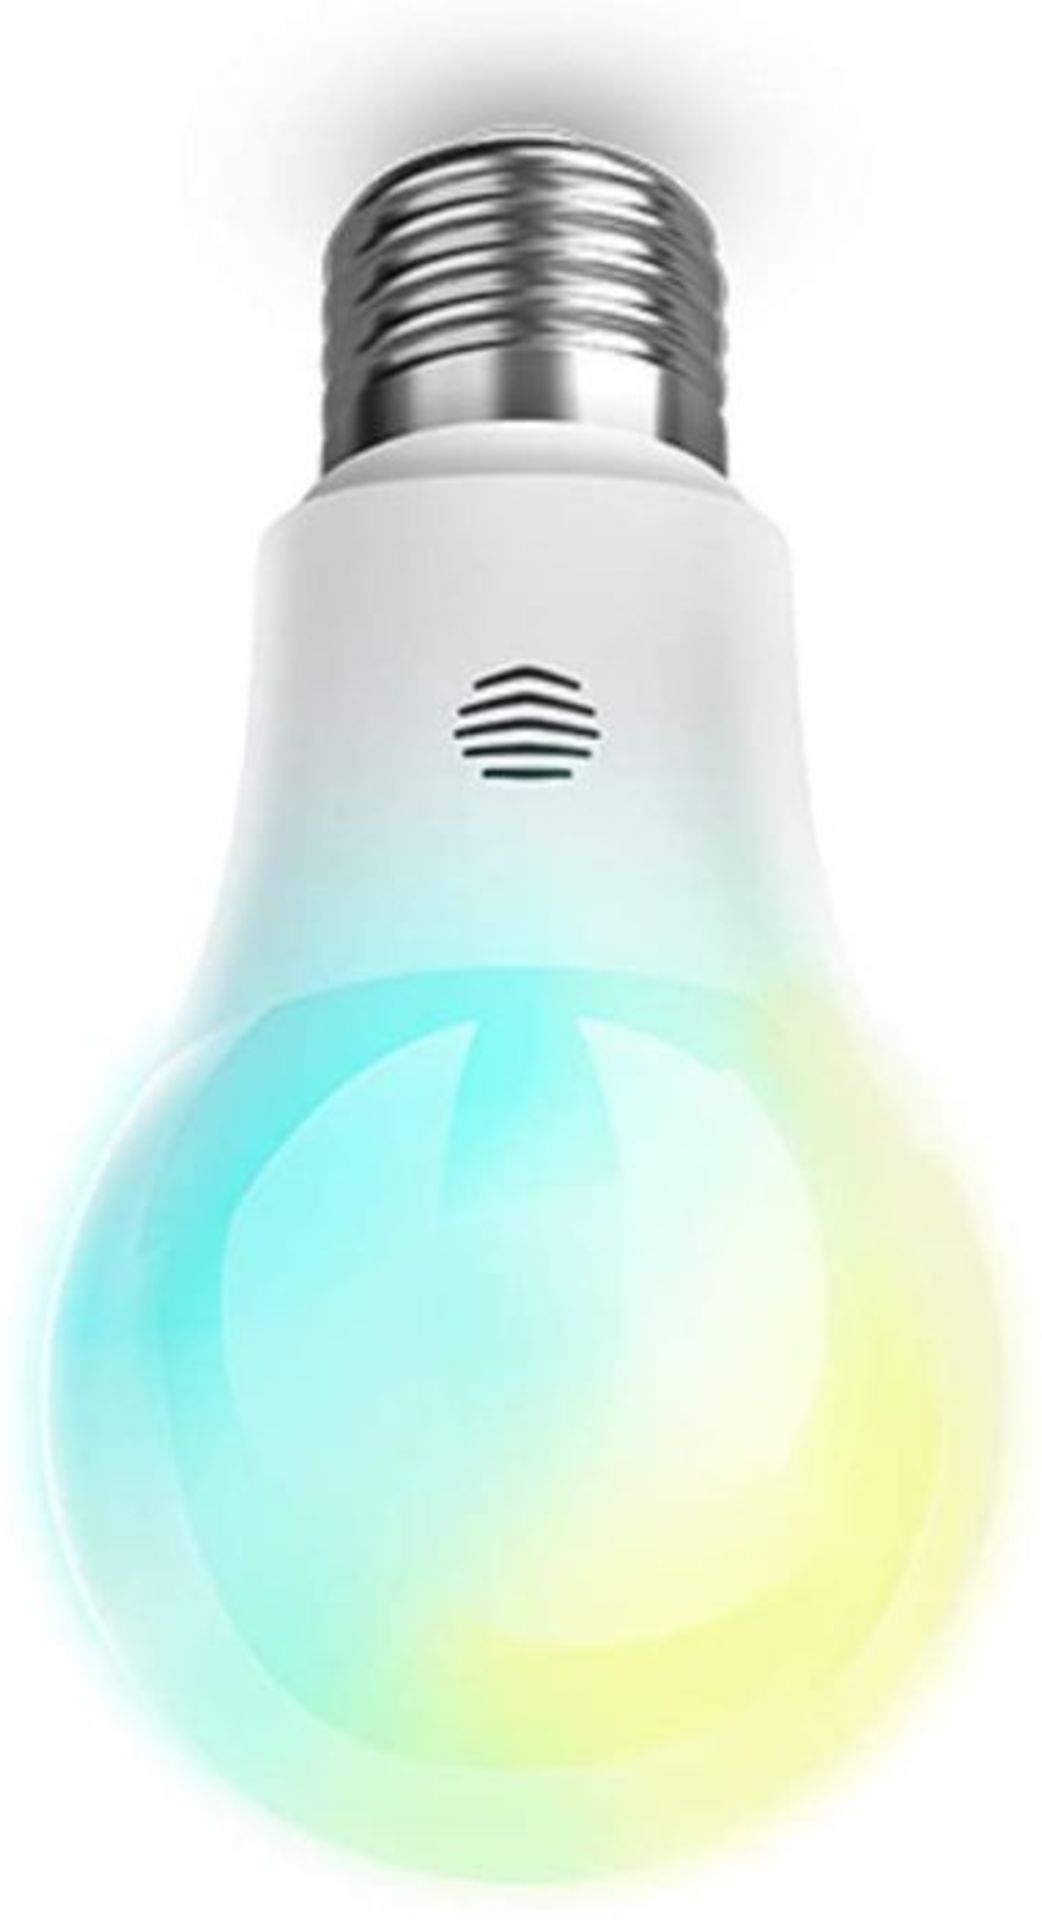 Hive Light Cool to Warm White Smart Bulb with E27 Screw-Works with Amazon Alexa, 9 W - RRP £22.99 (